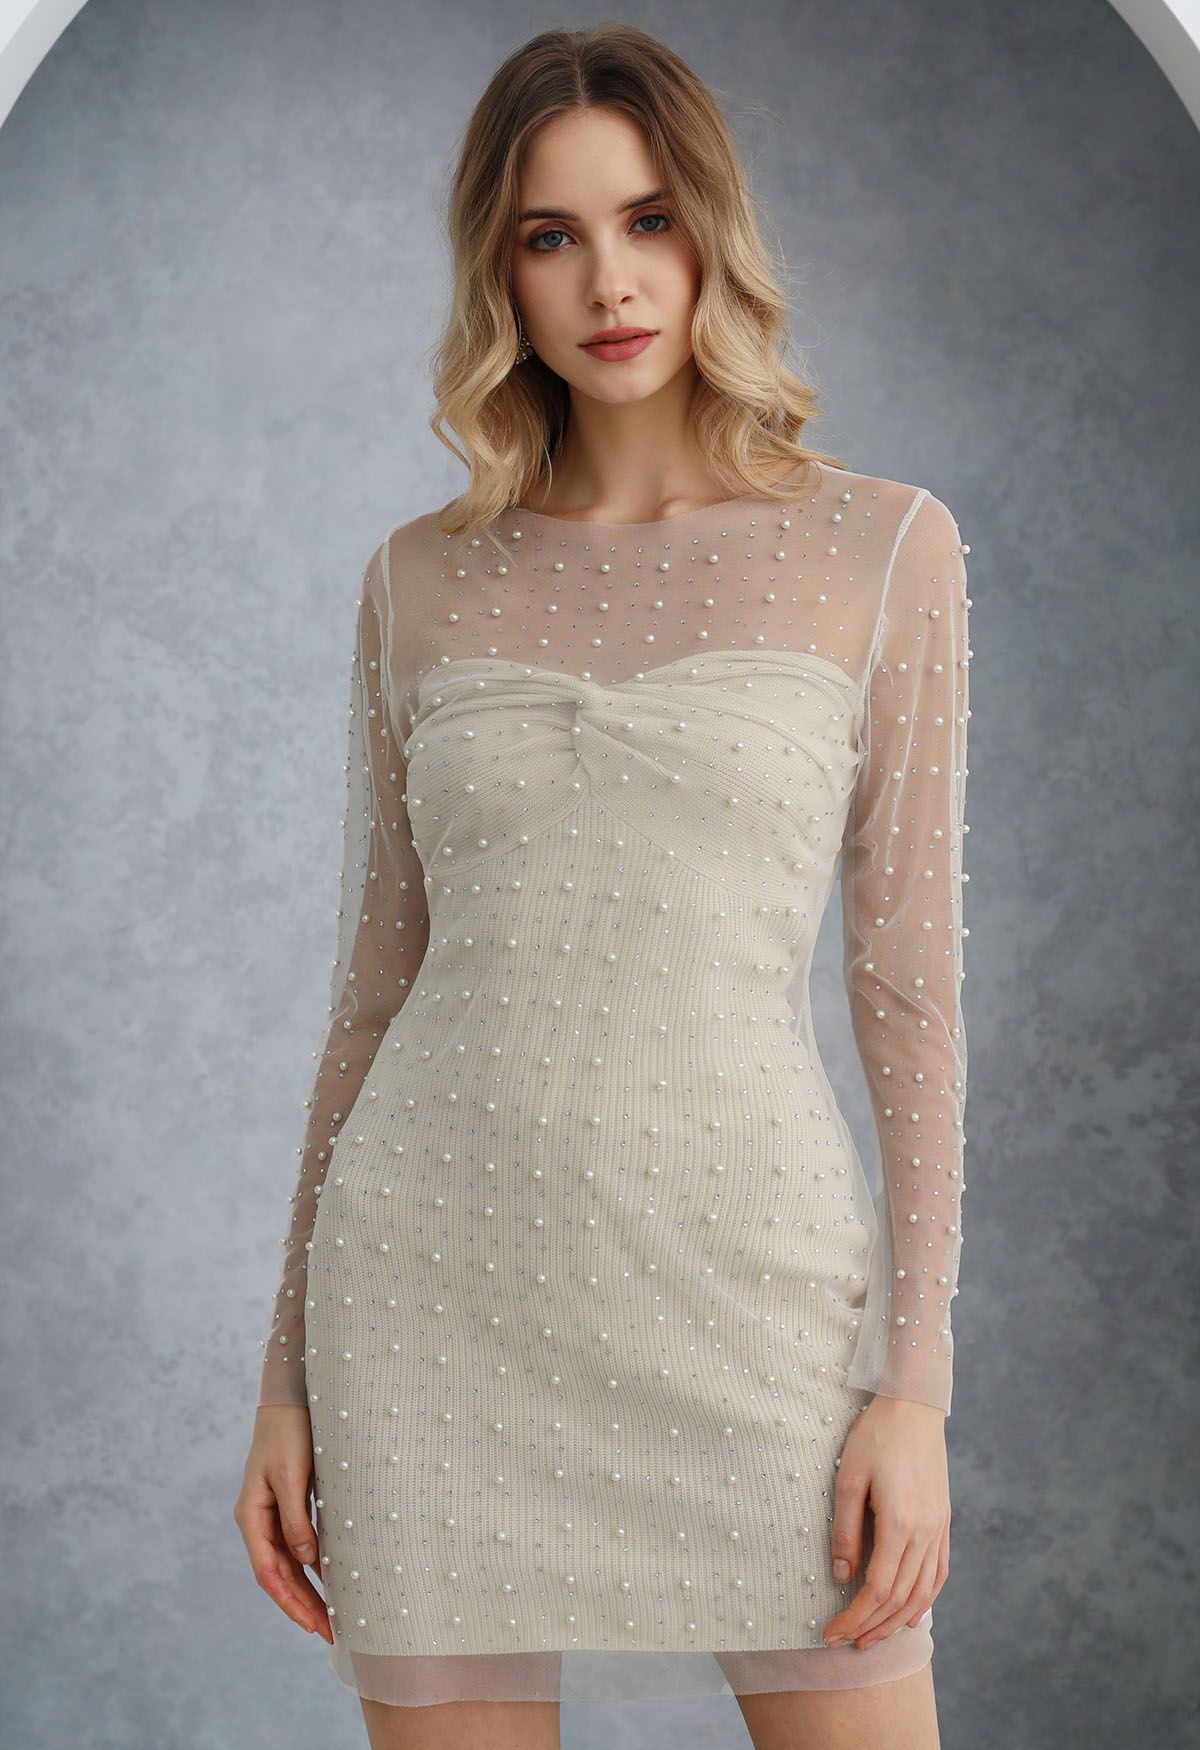 Full Pearl Embellished Sheer Mesh Cover-Up Dress in White